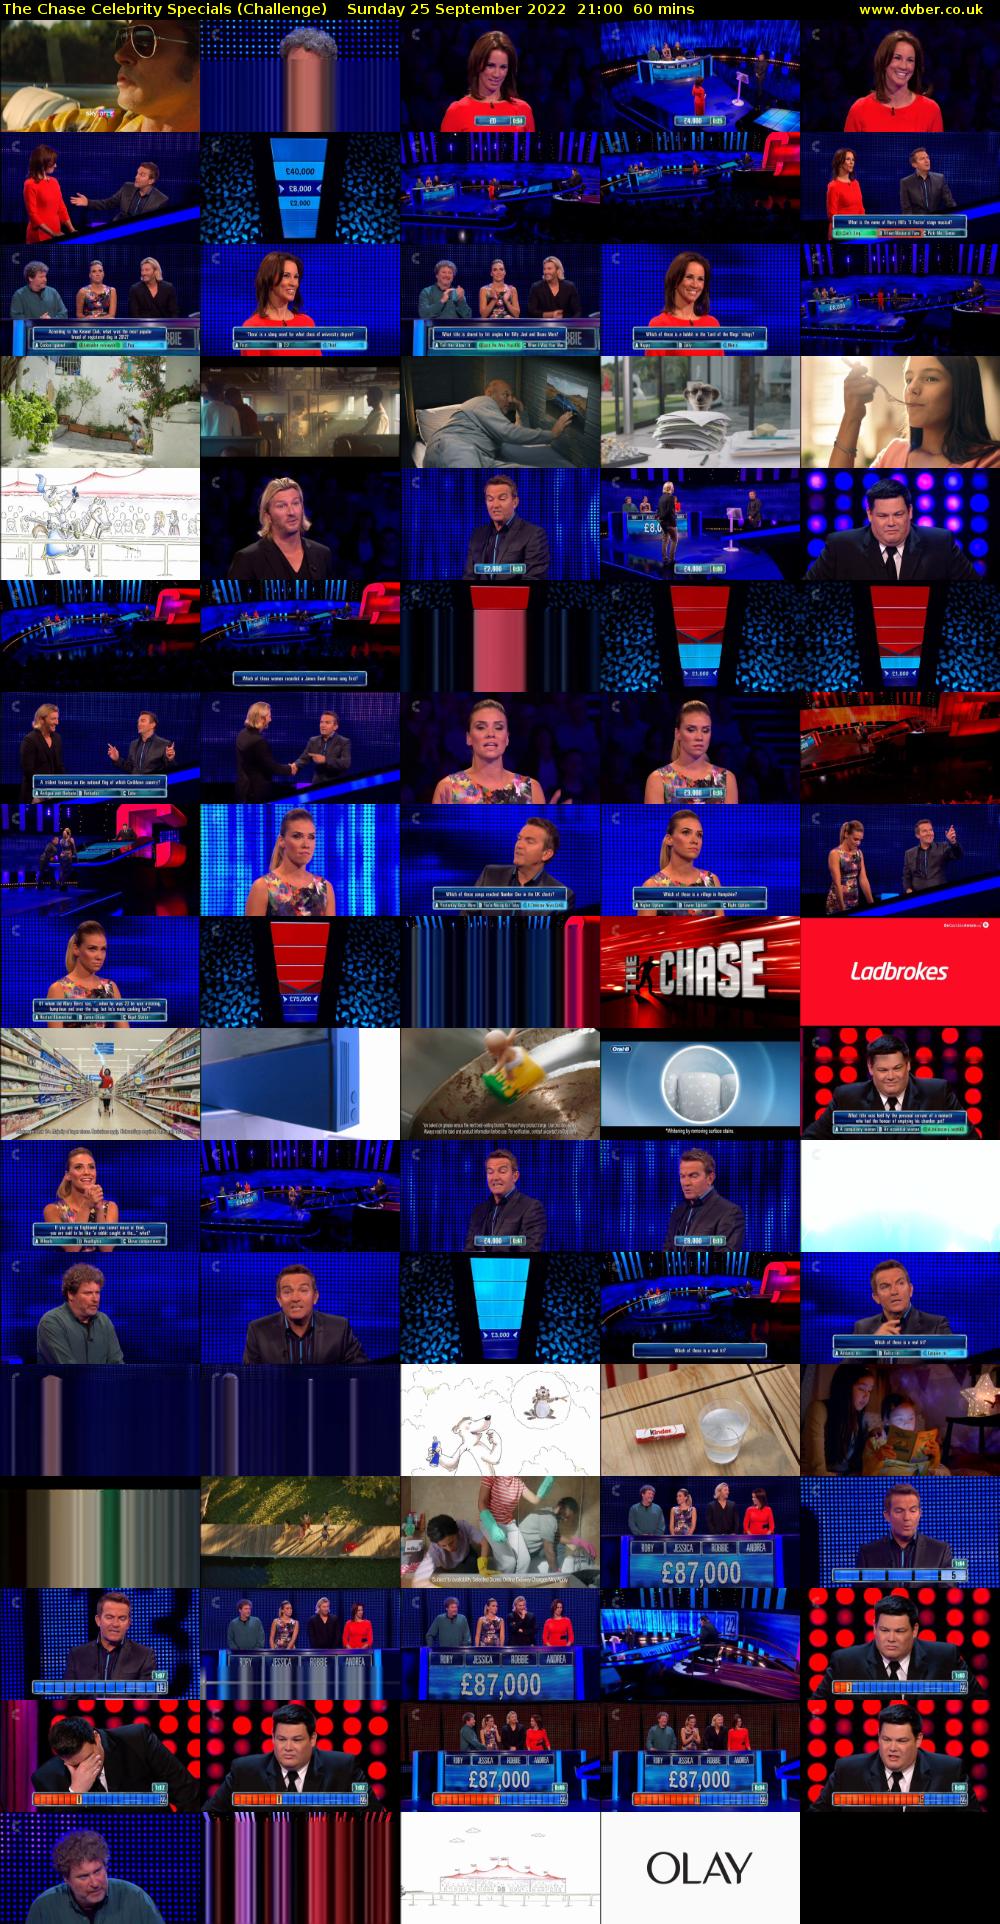 The Chase Celebrity Specials (Challenge) Sunday 25 September 2022 21:00 - 22:00